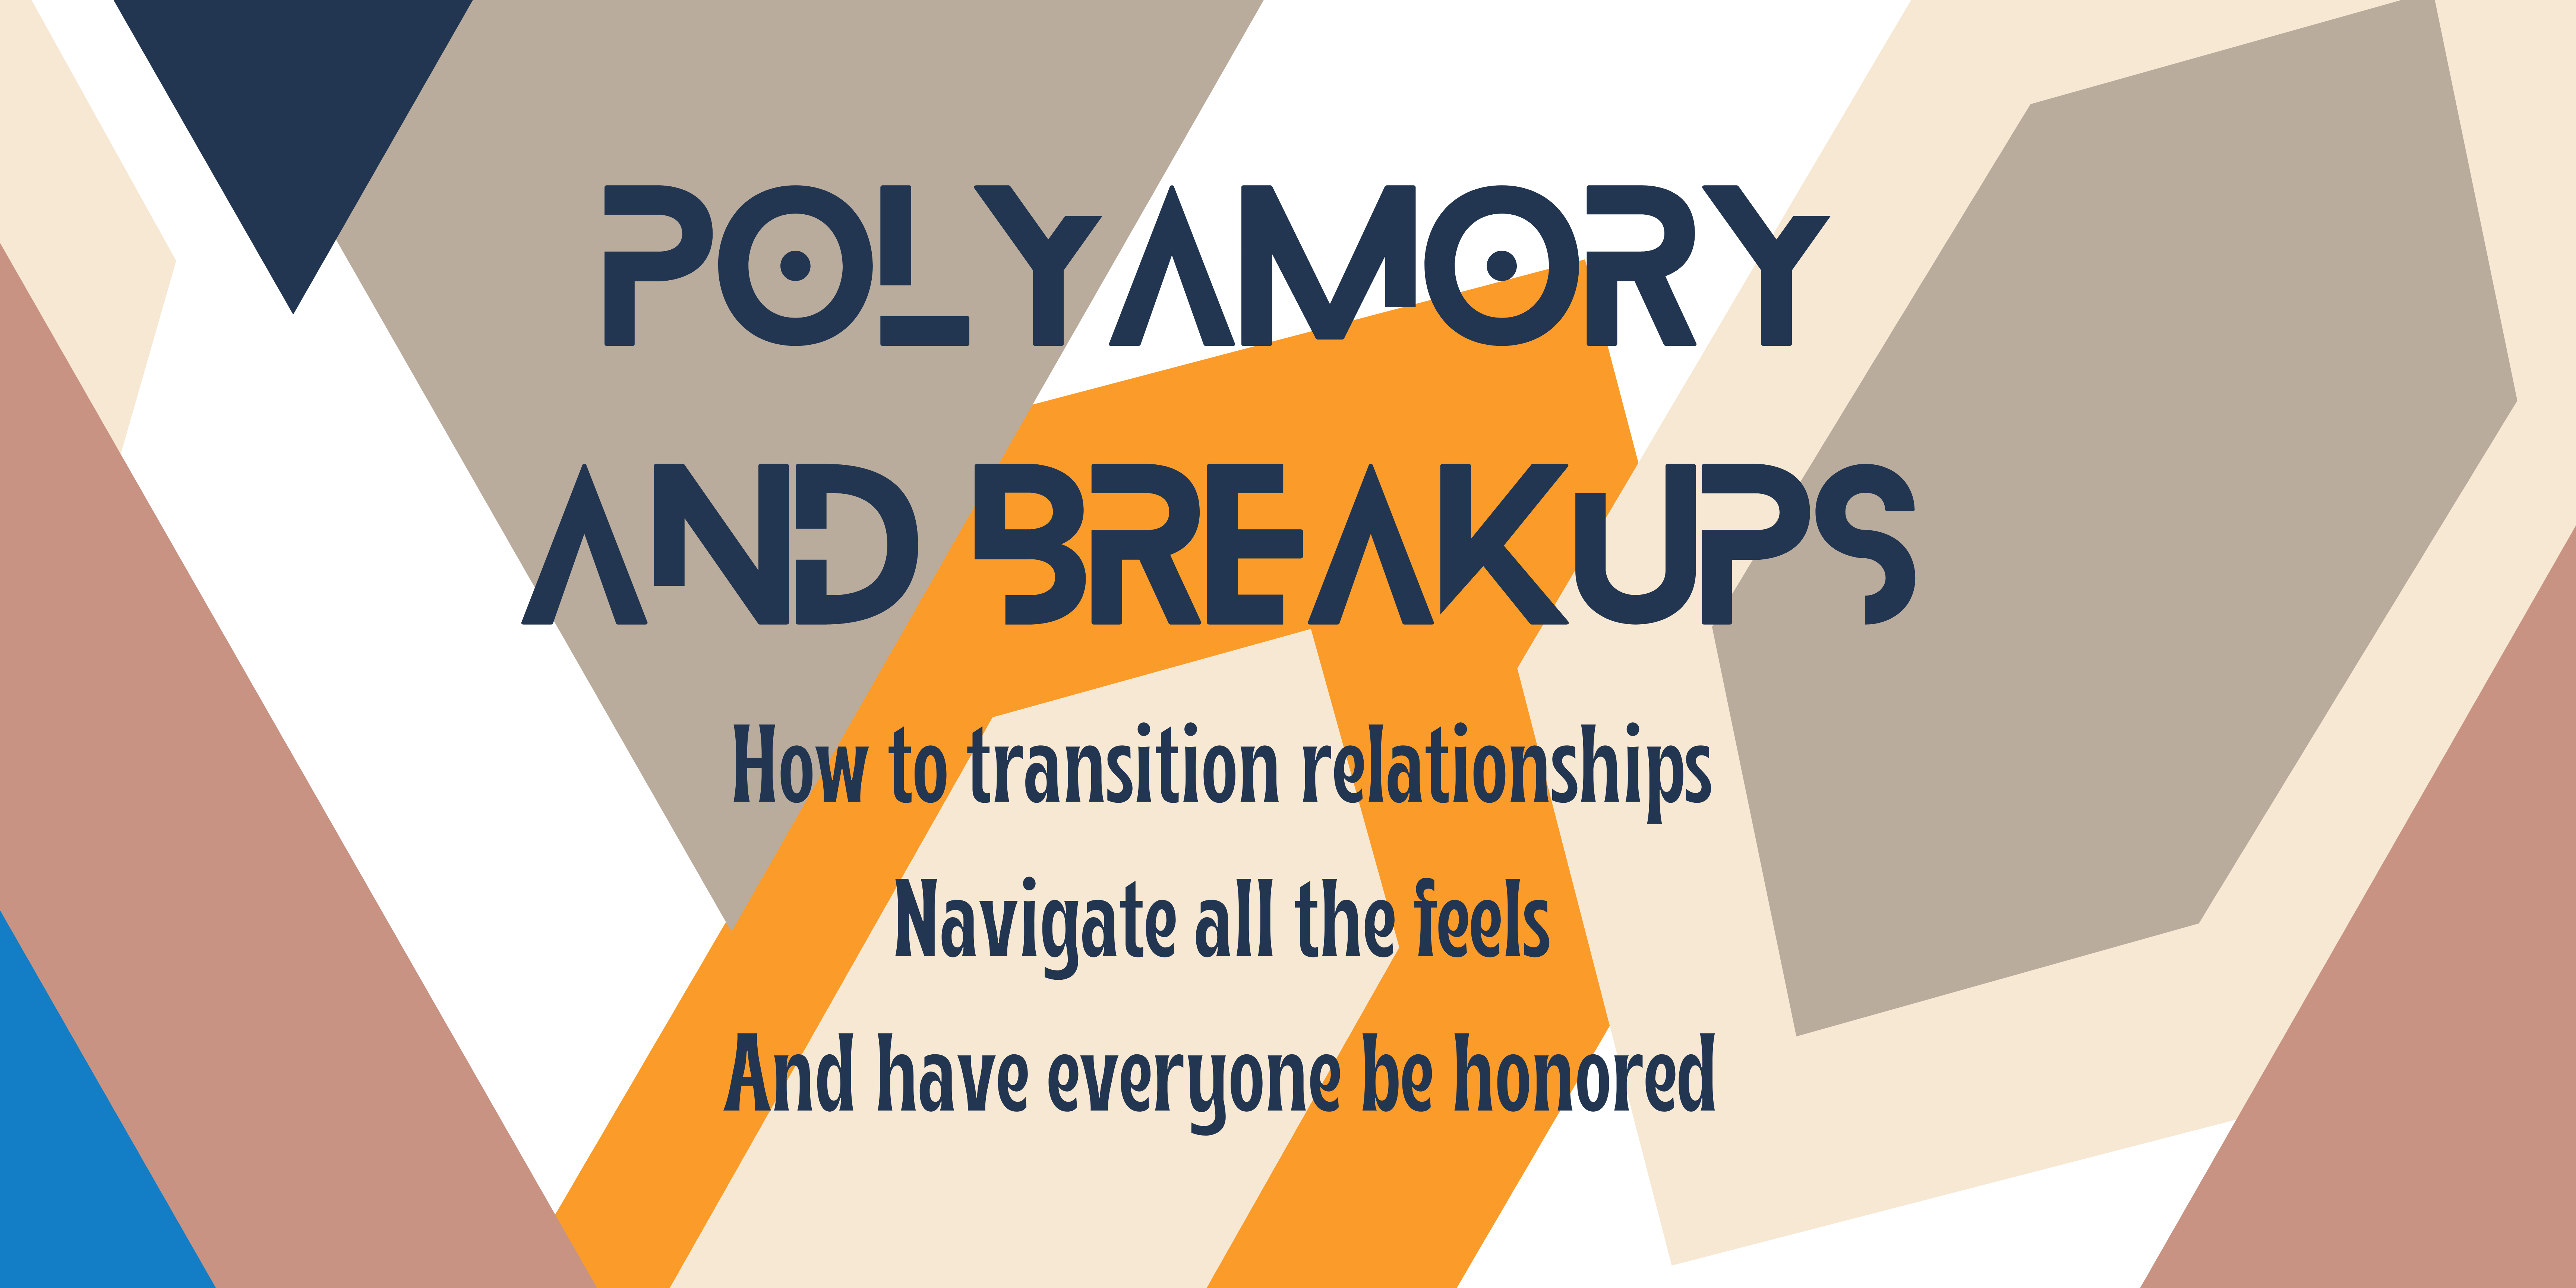 Polyamory and Breakups: How to transition relationships, Navigate all the feels, And have everyone be honored - December 13th from 9am - 5pm PST.